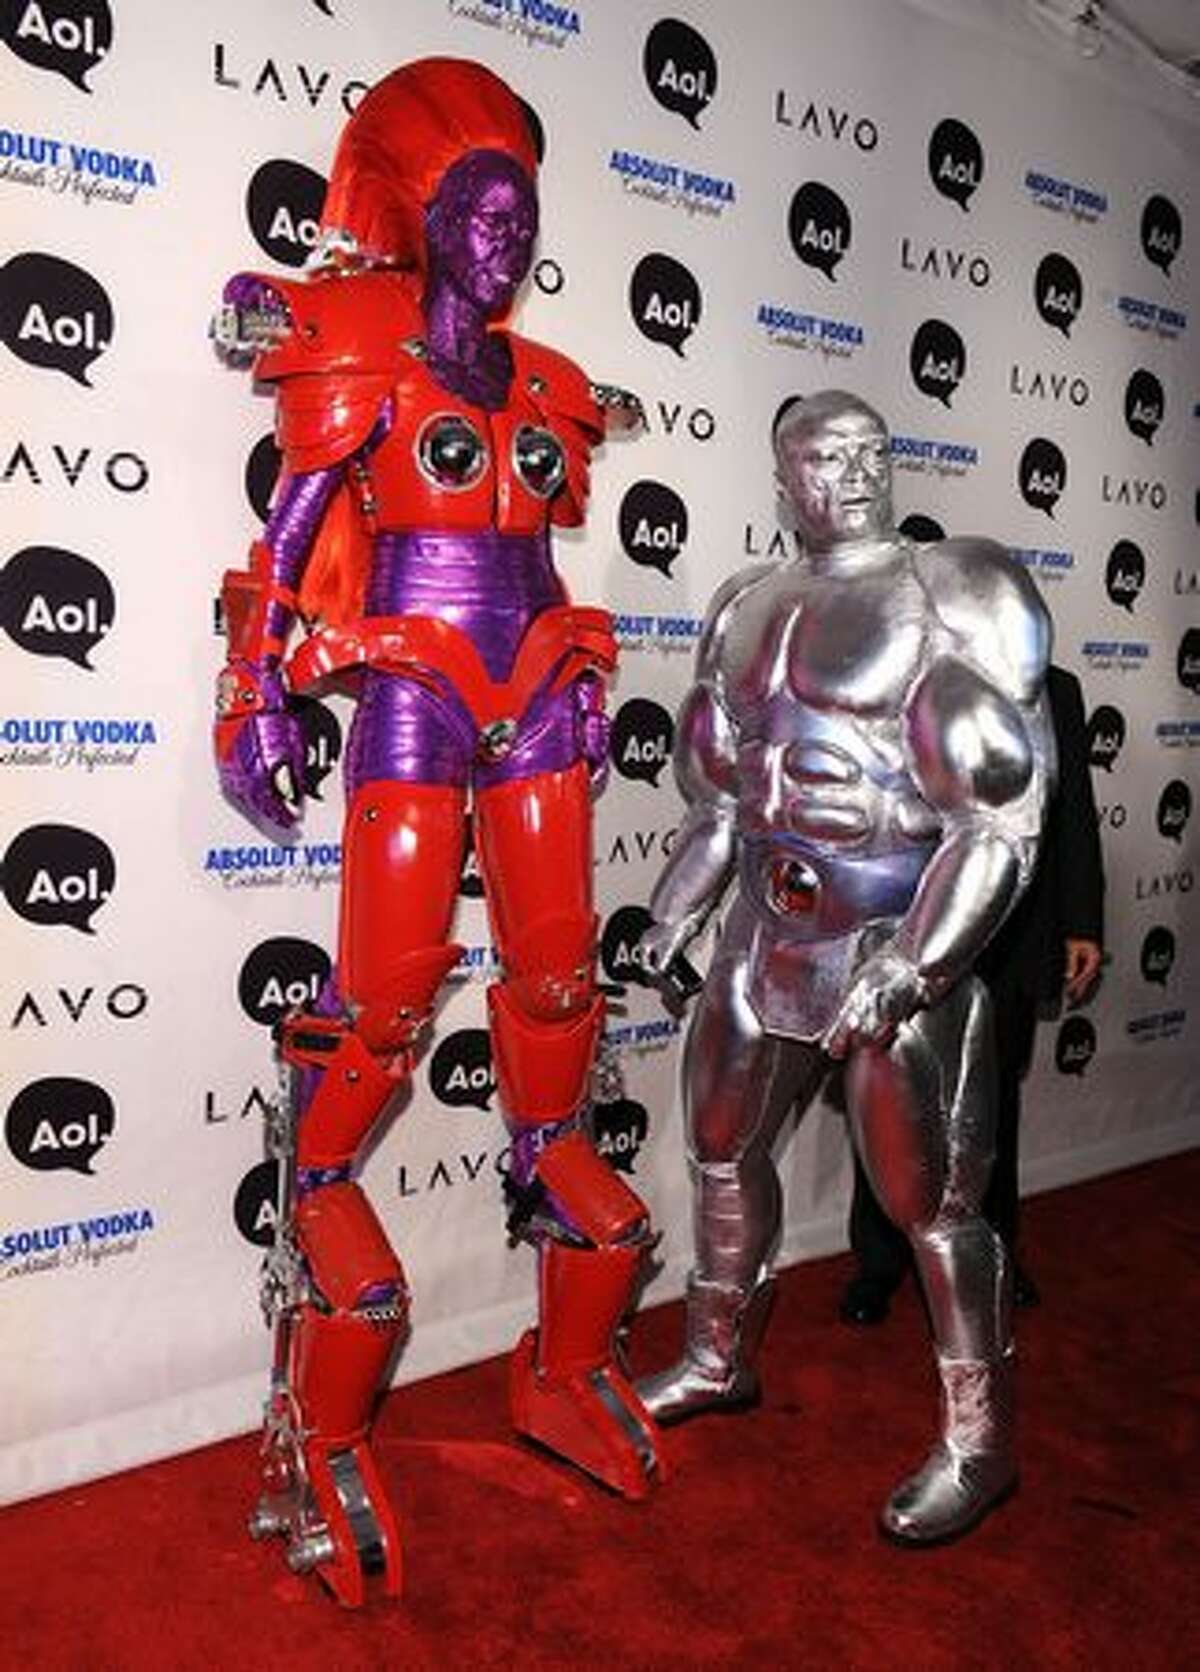 Heidi Klum and Seal attend Heidi Klum's 2010 Halloween Party at Lavo in New York City.